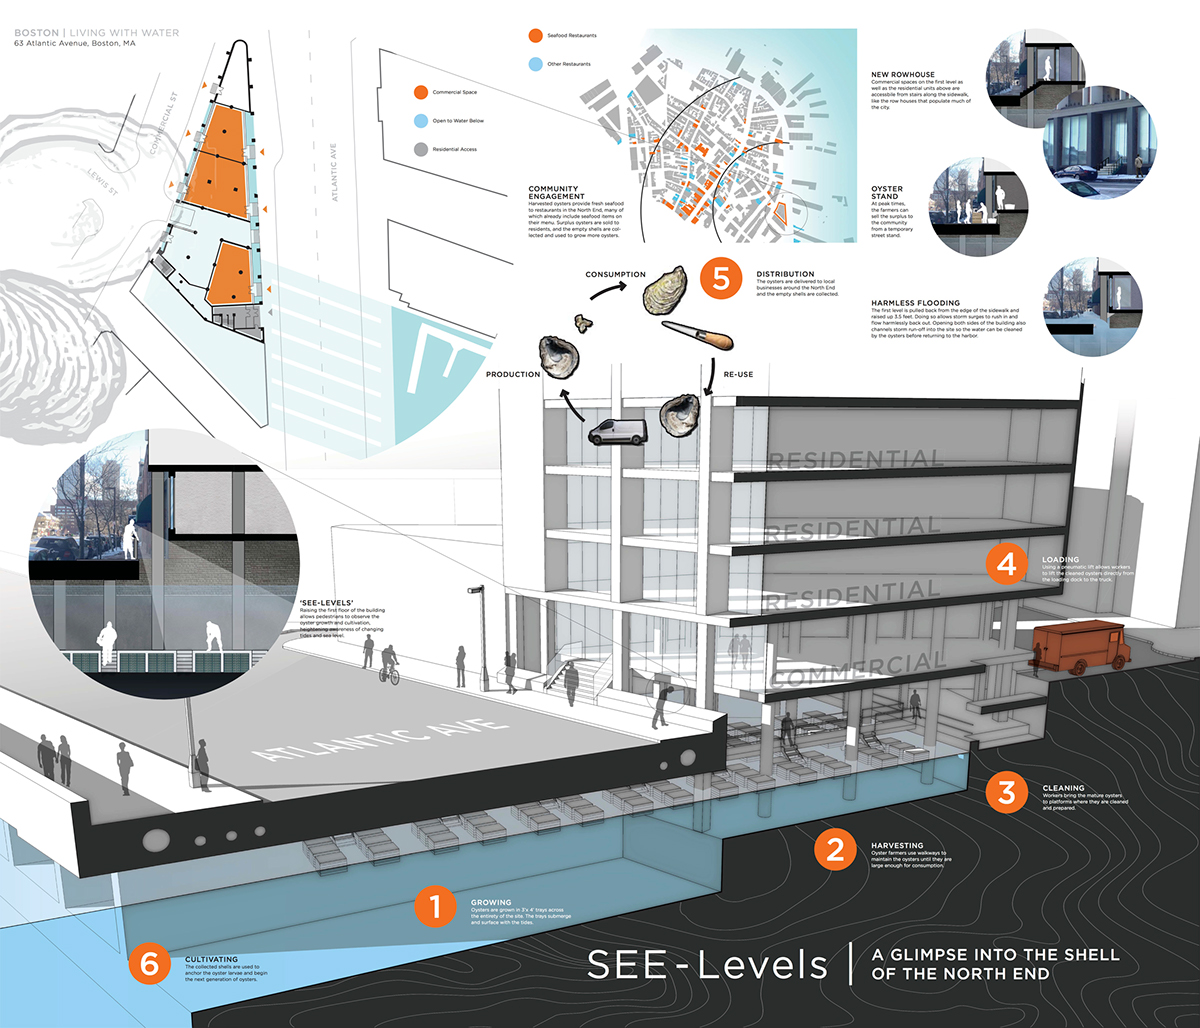 living with water boston Sea Level Rise Prince Building atlantic avenue retrofit oyster closed loop Urban intervention